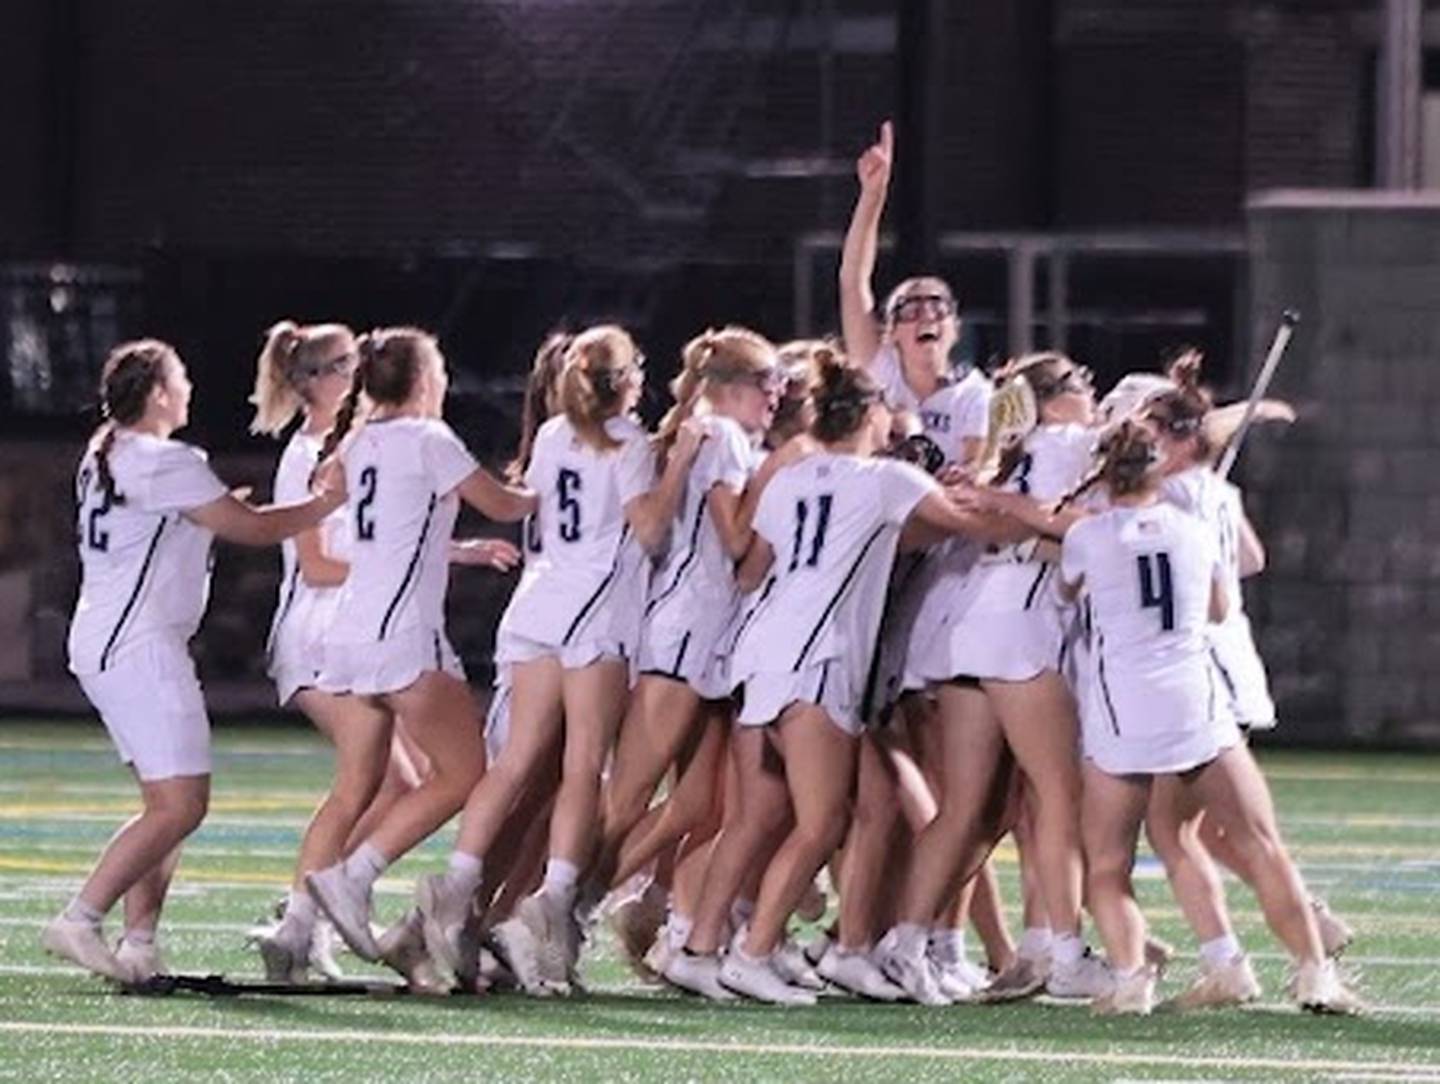 Manchester Valley's girls lacrosse team celebrates after Thursday's Class 2A state championship game. The No. 6 Mavericks completed a perfect season (19-0) with a 15-7 victory over Frederick County's Middletown at Stevenson University.